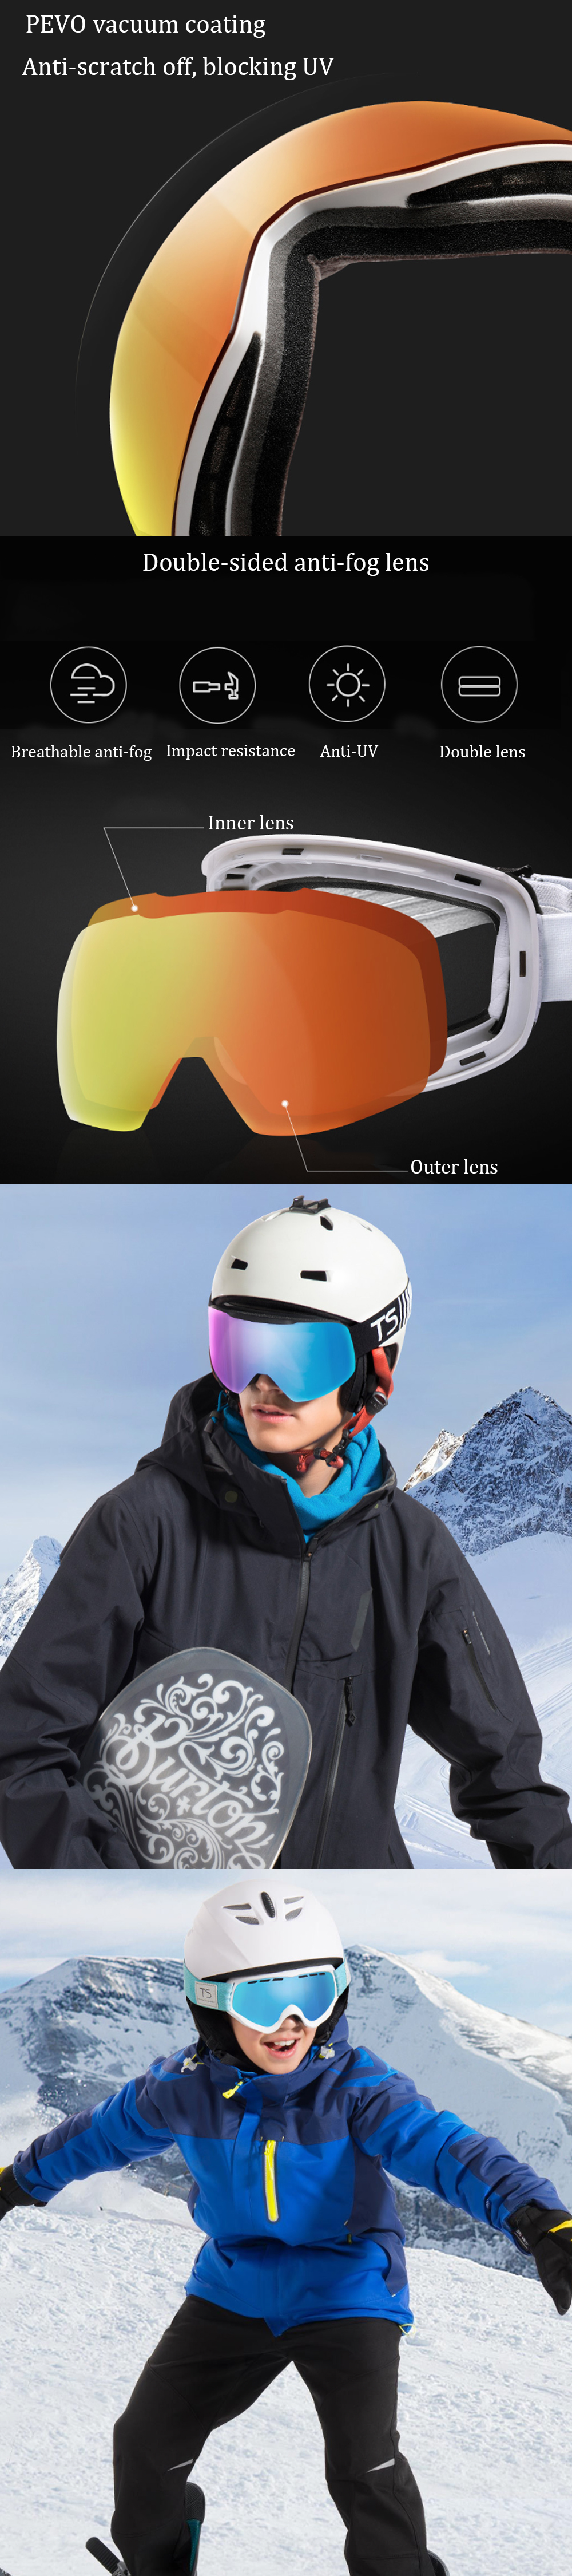 Xiaomi-TS-Skiing-Goggles-Children-Anti-Fog-Adjustable-Double-Lens-Snowboard-Goggles-Outdoor-Skiing-S-1400312